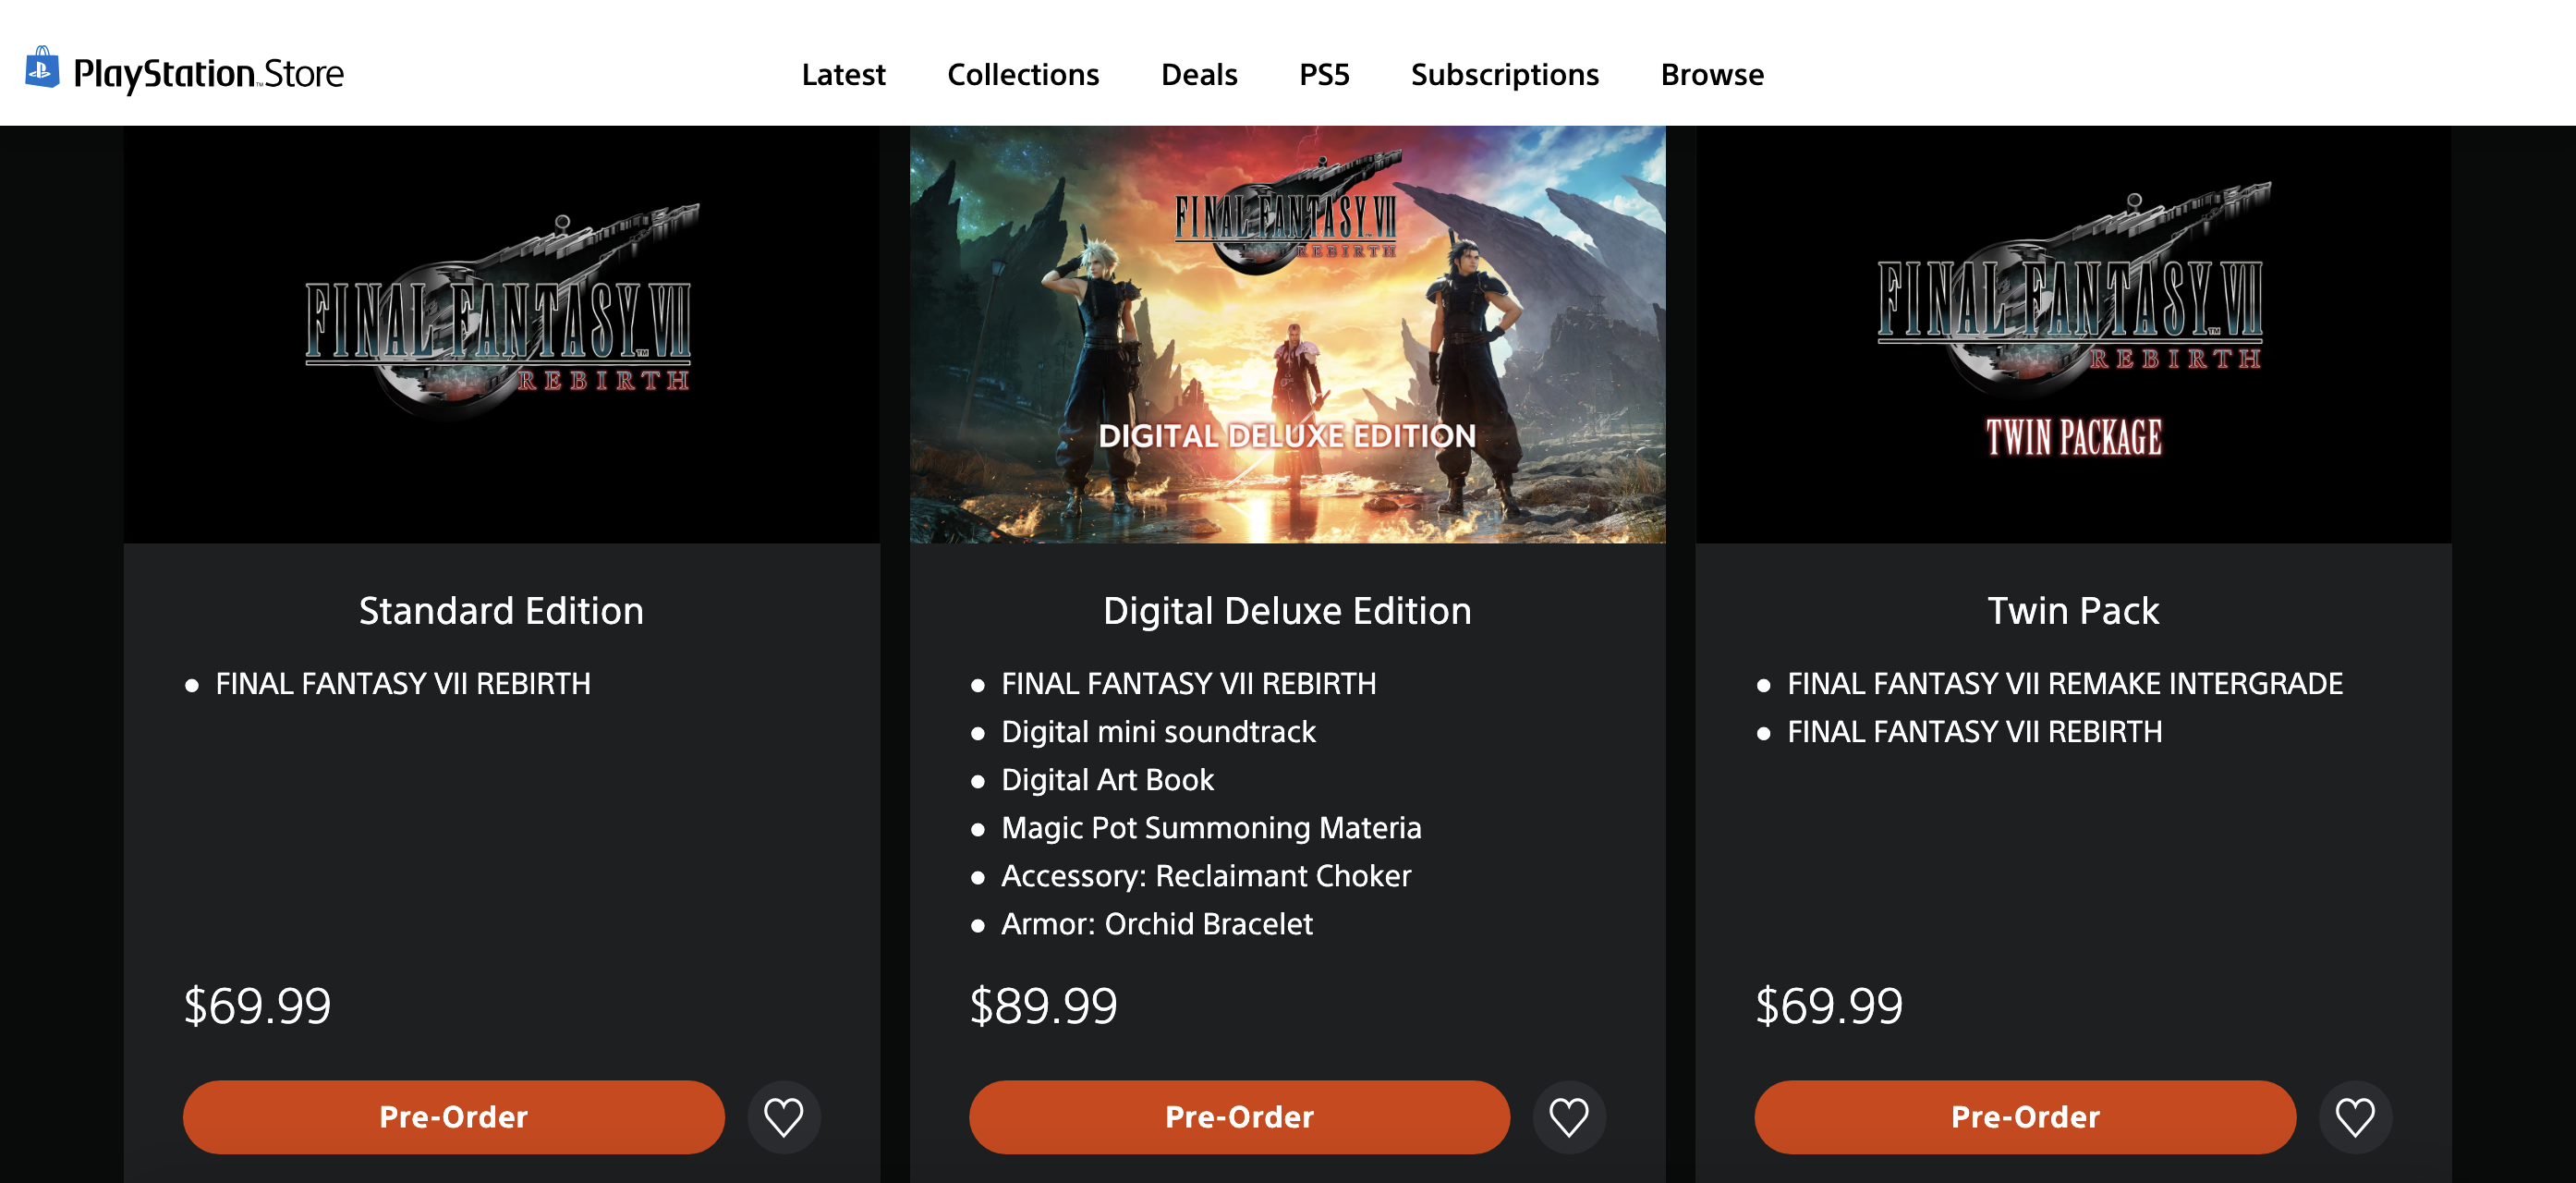 The Playstation Store options for purchasing the game